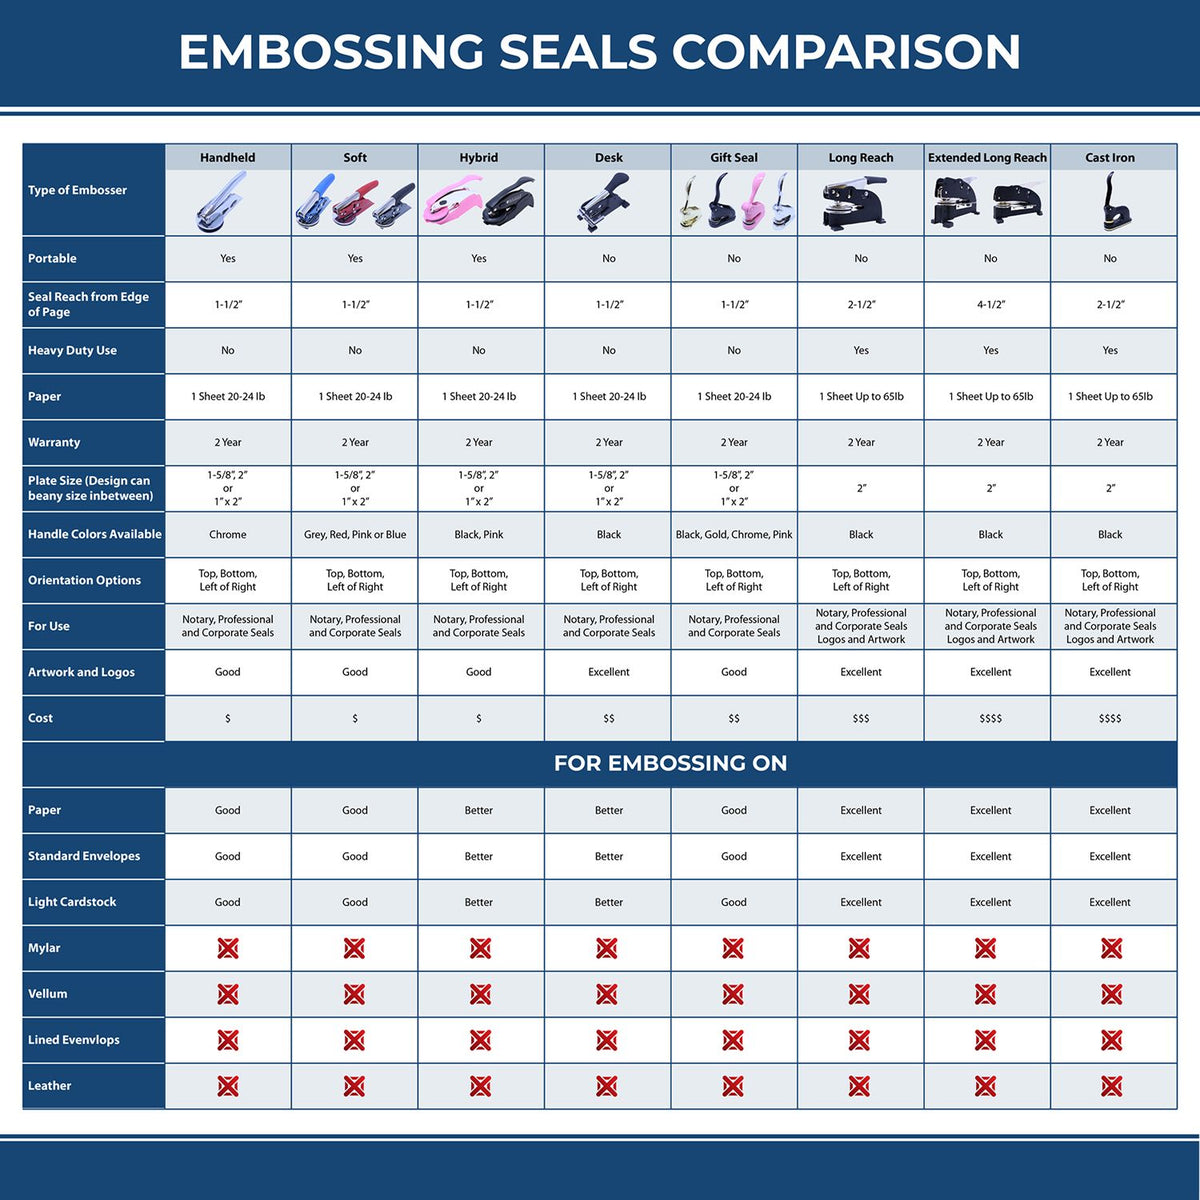 A comparison chart for the different types of mount models available for the Soft Delaware Professional Engineer Seal.